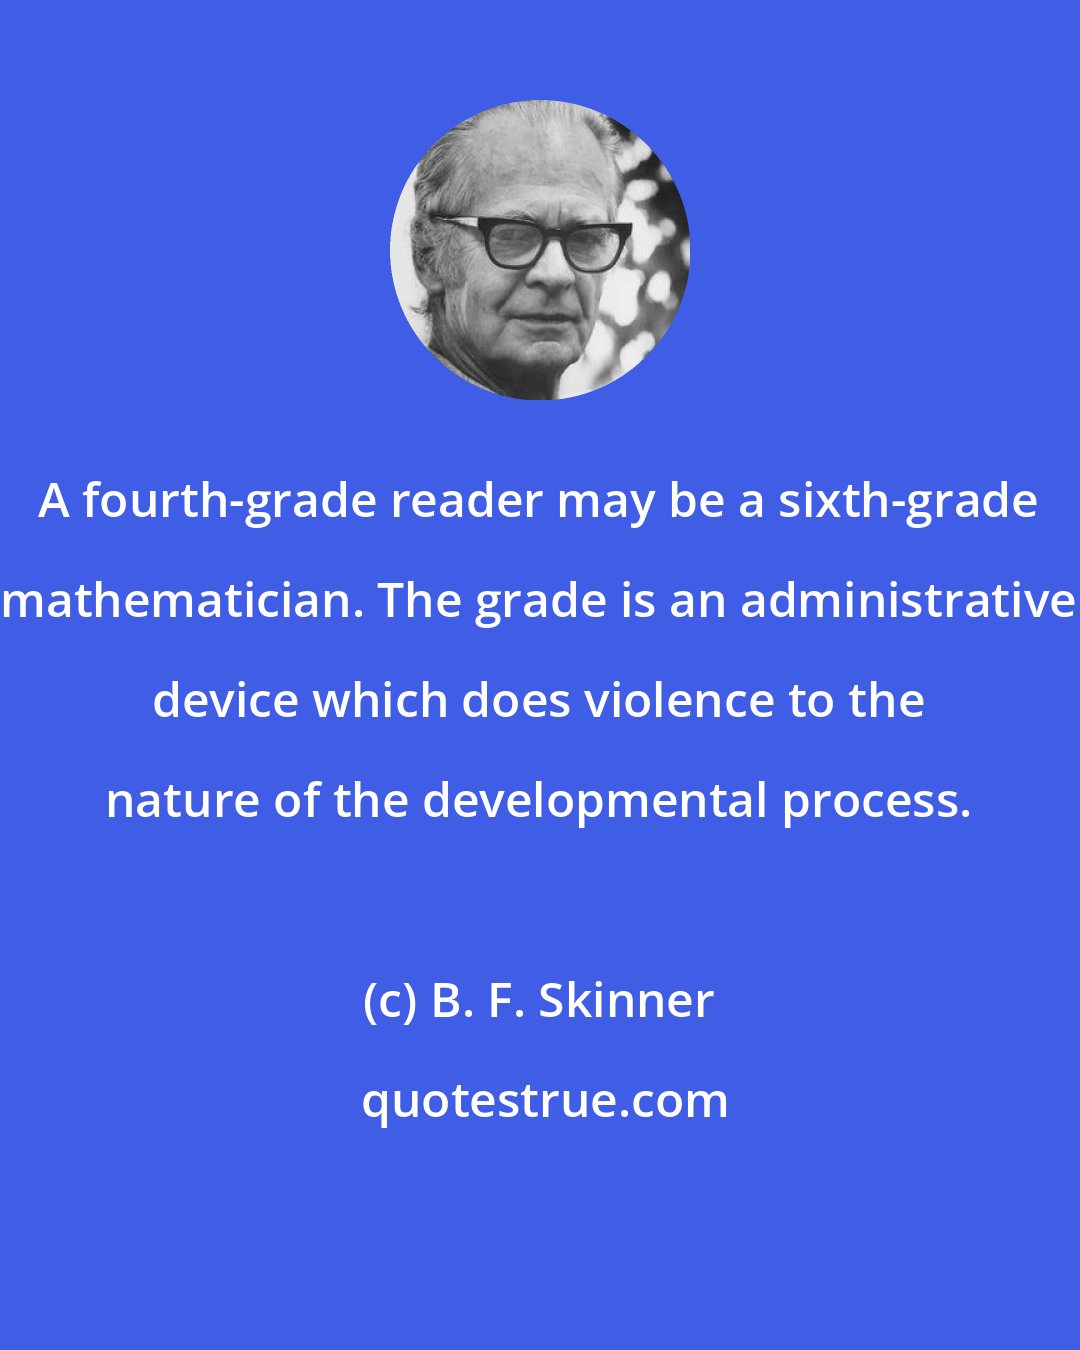 B. F. Skinner: A fourth-grade reader may be a sixth-grade mathematician. The grade is an administrative device which does violence to the nature of the developmental process.